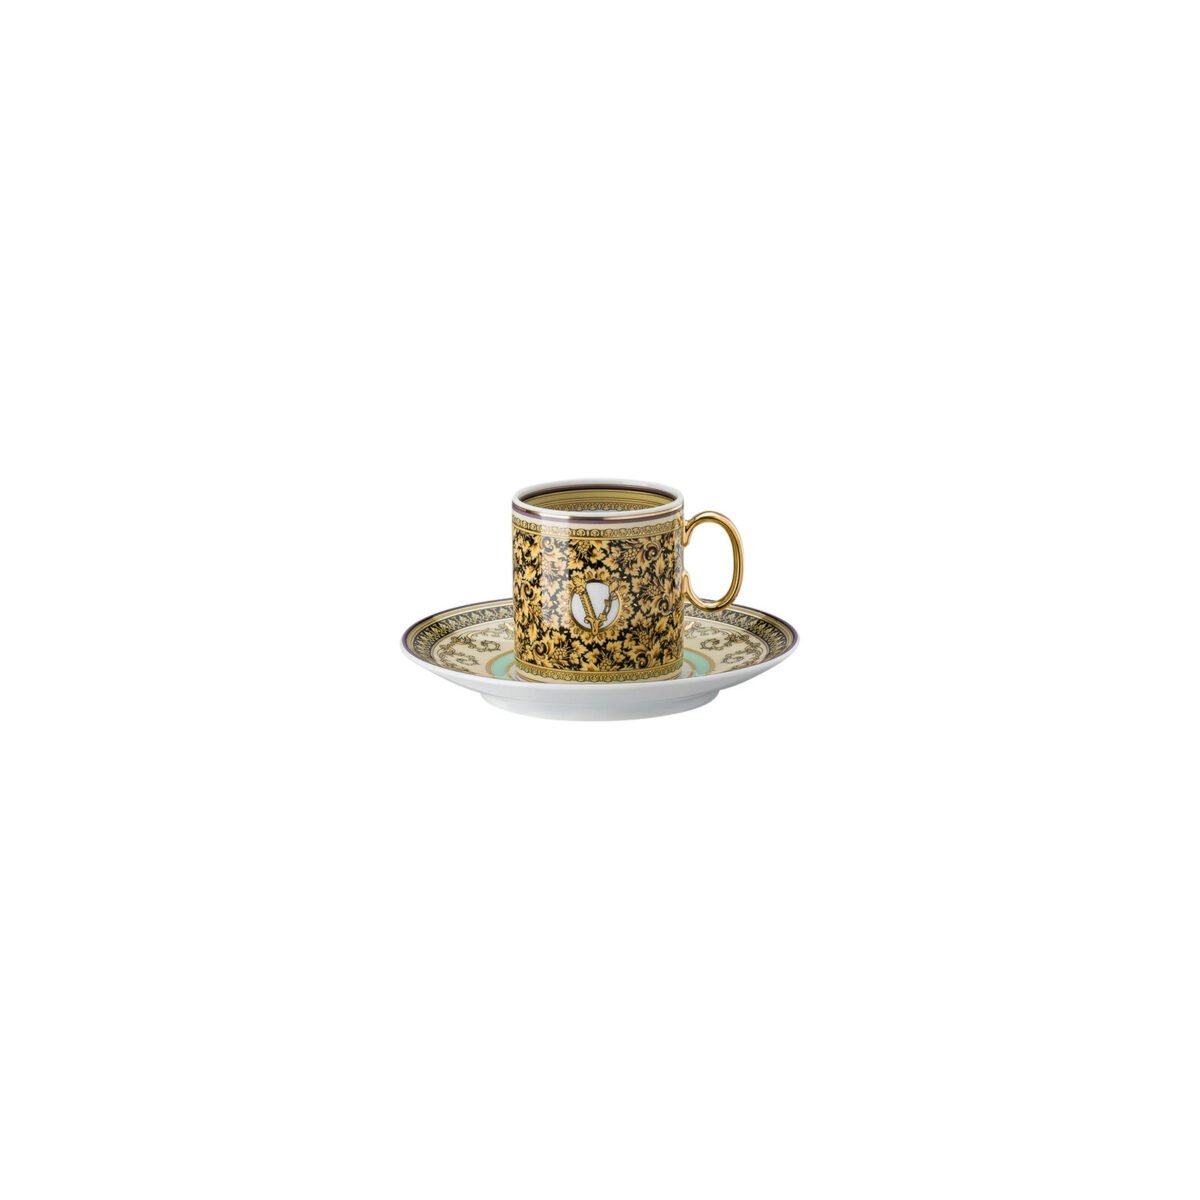 Versace Rosenthal Barocco Mosaic espresso cup and saucer